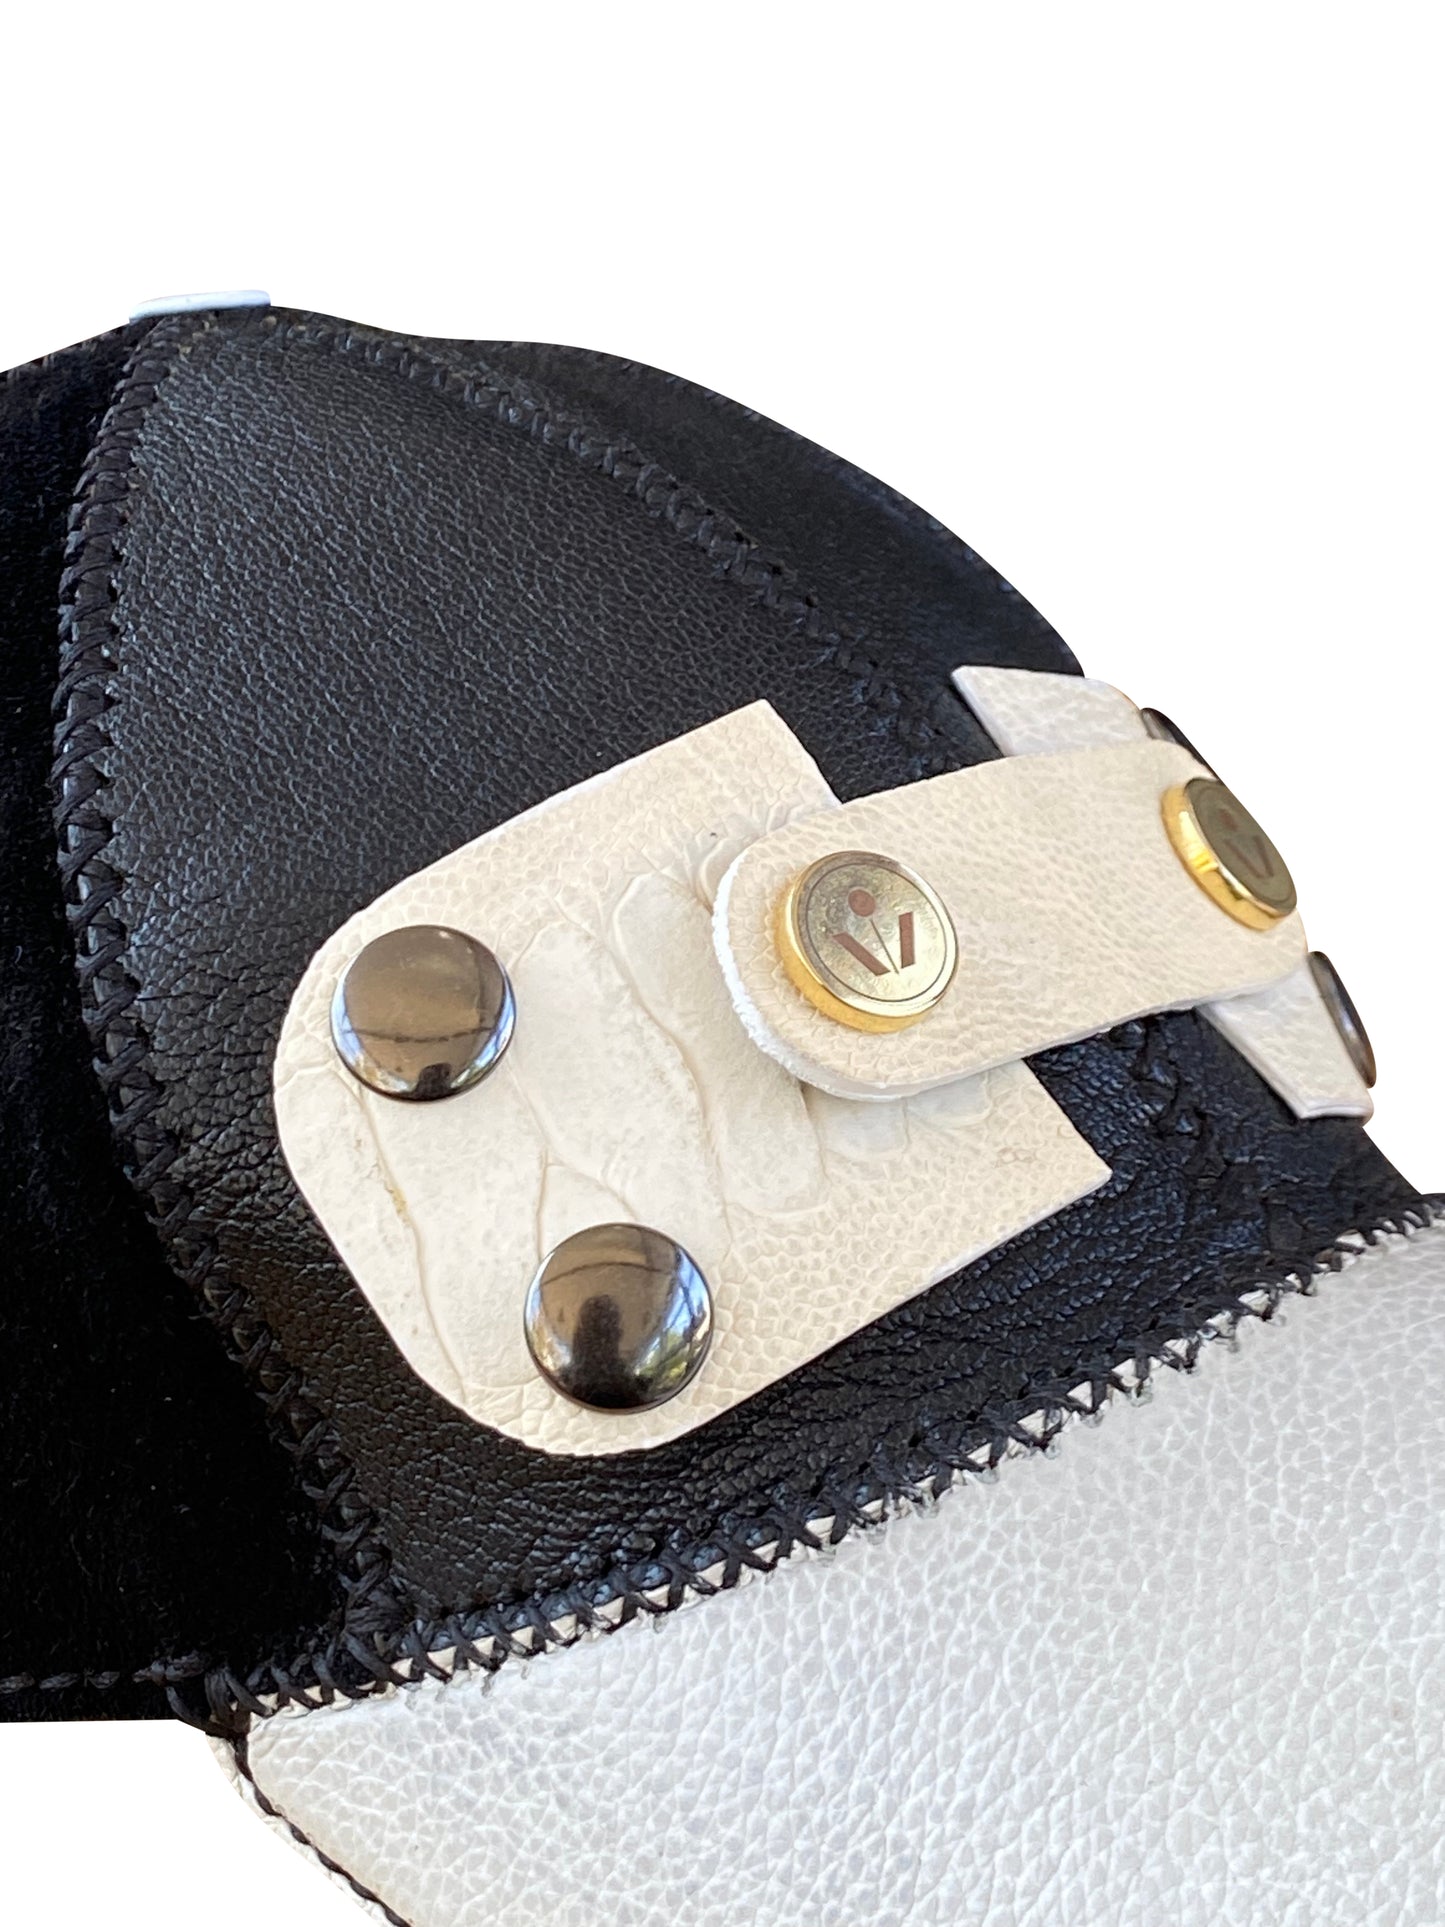 Black Artisanal Cap with Ostrich Leather